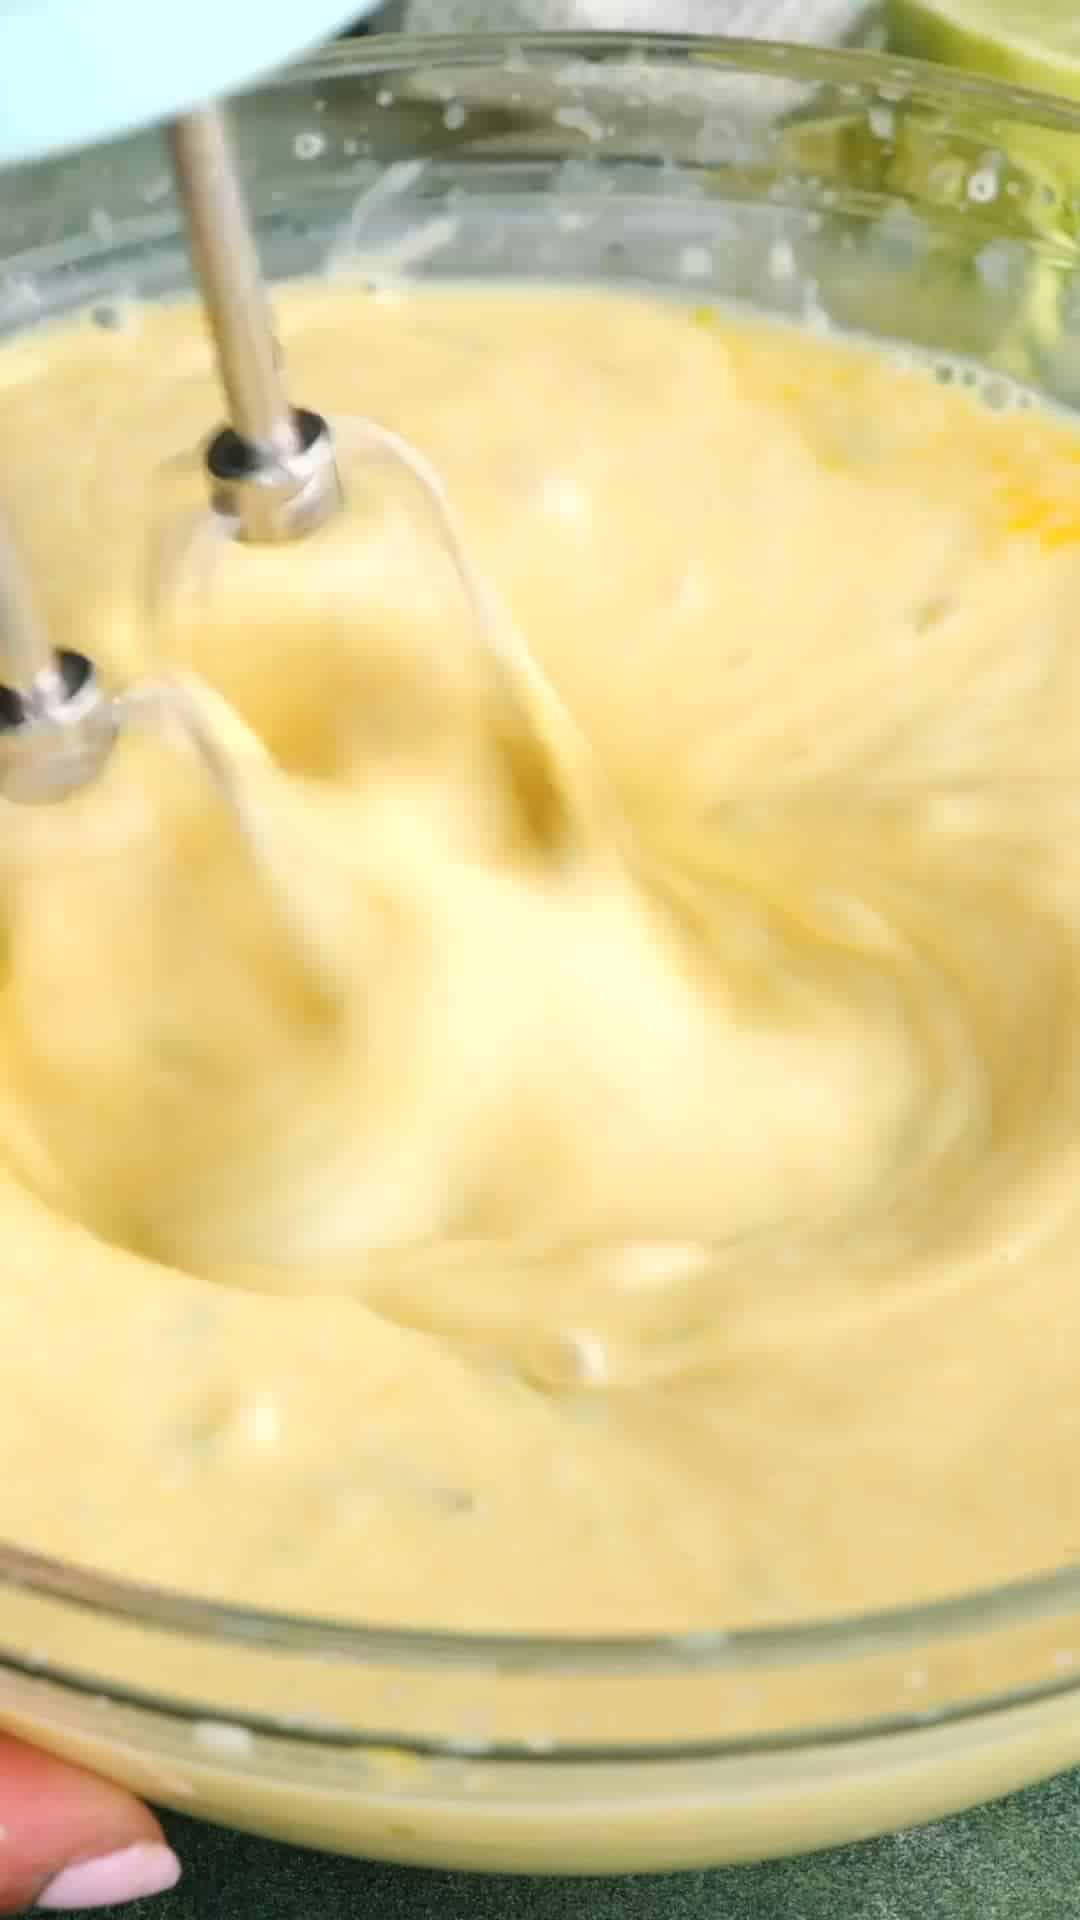 Key lime pie filling being beaten with a hand mixer